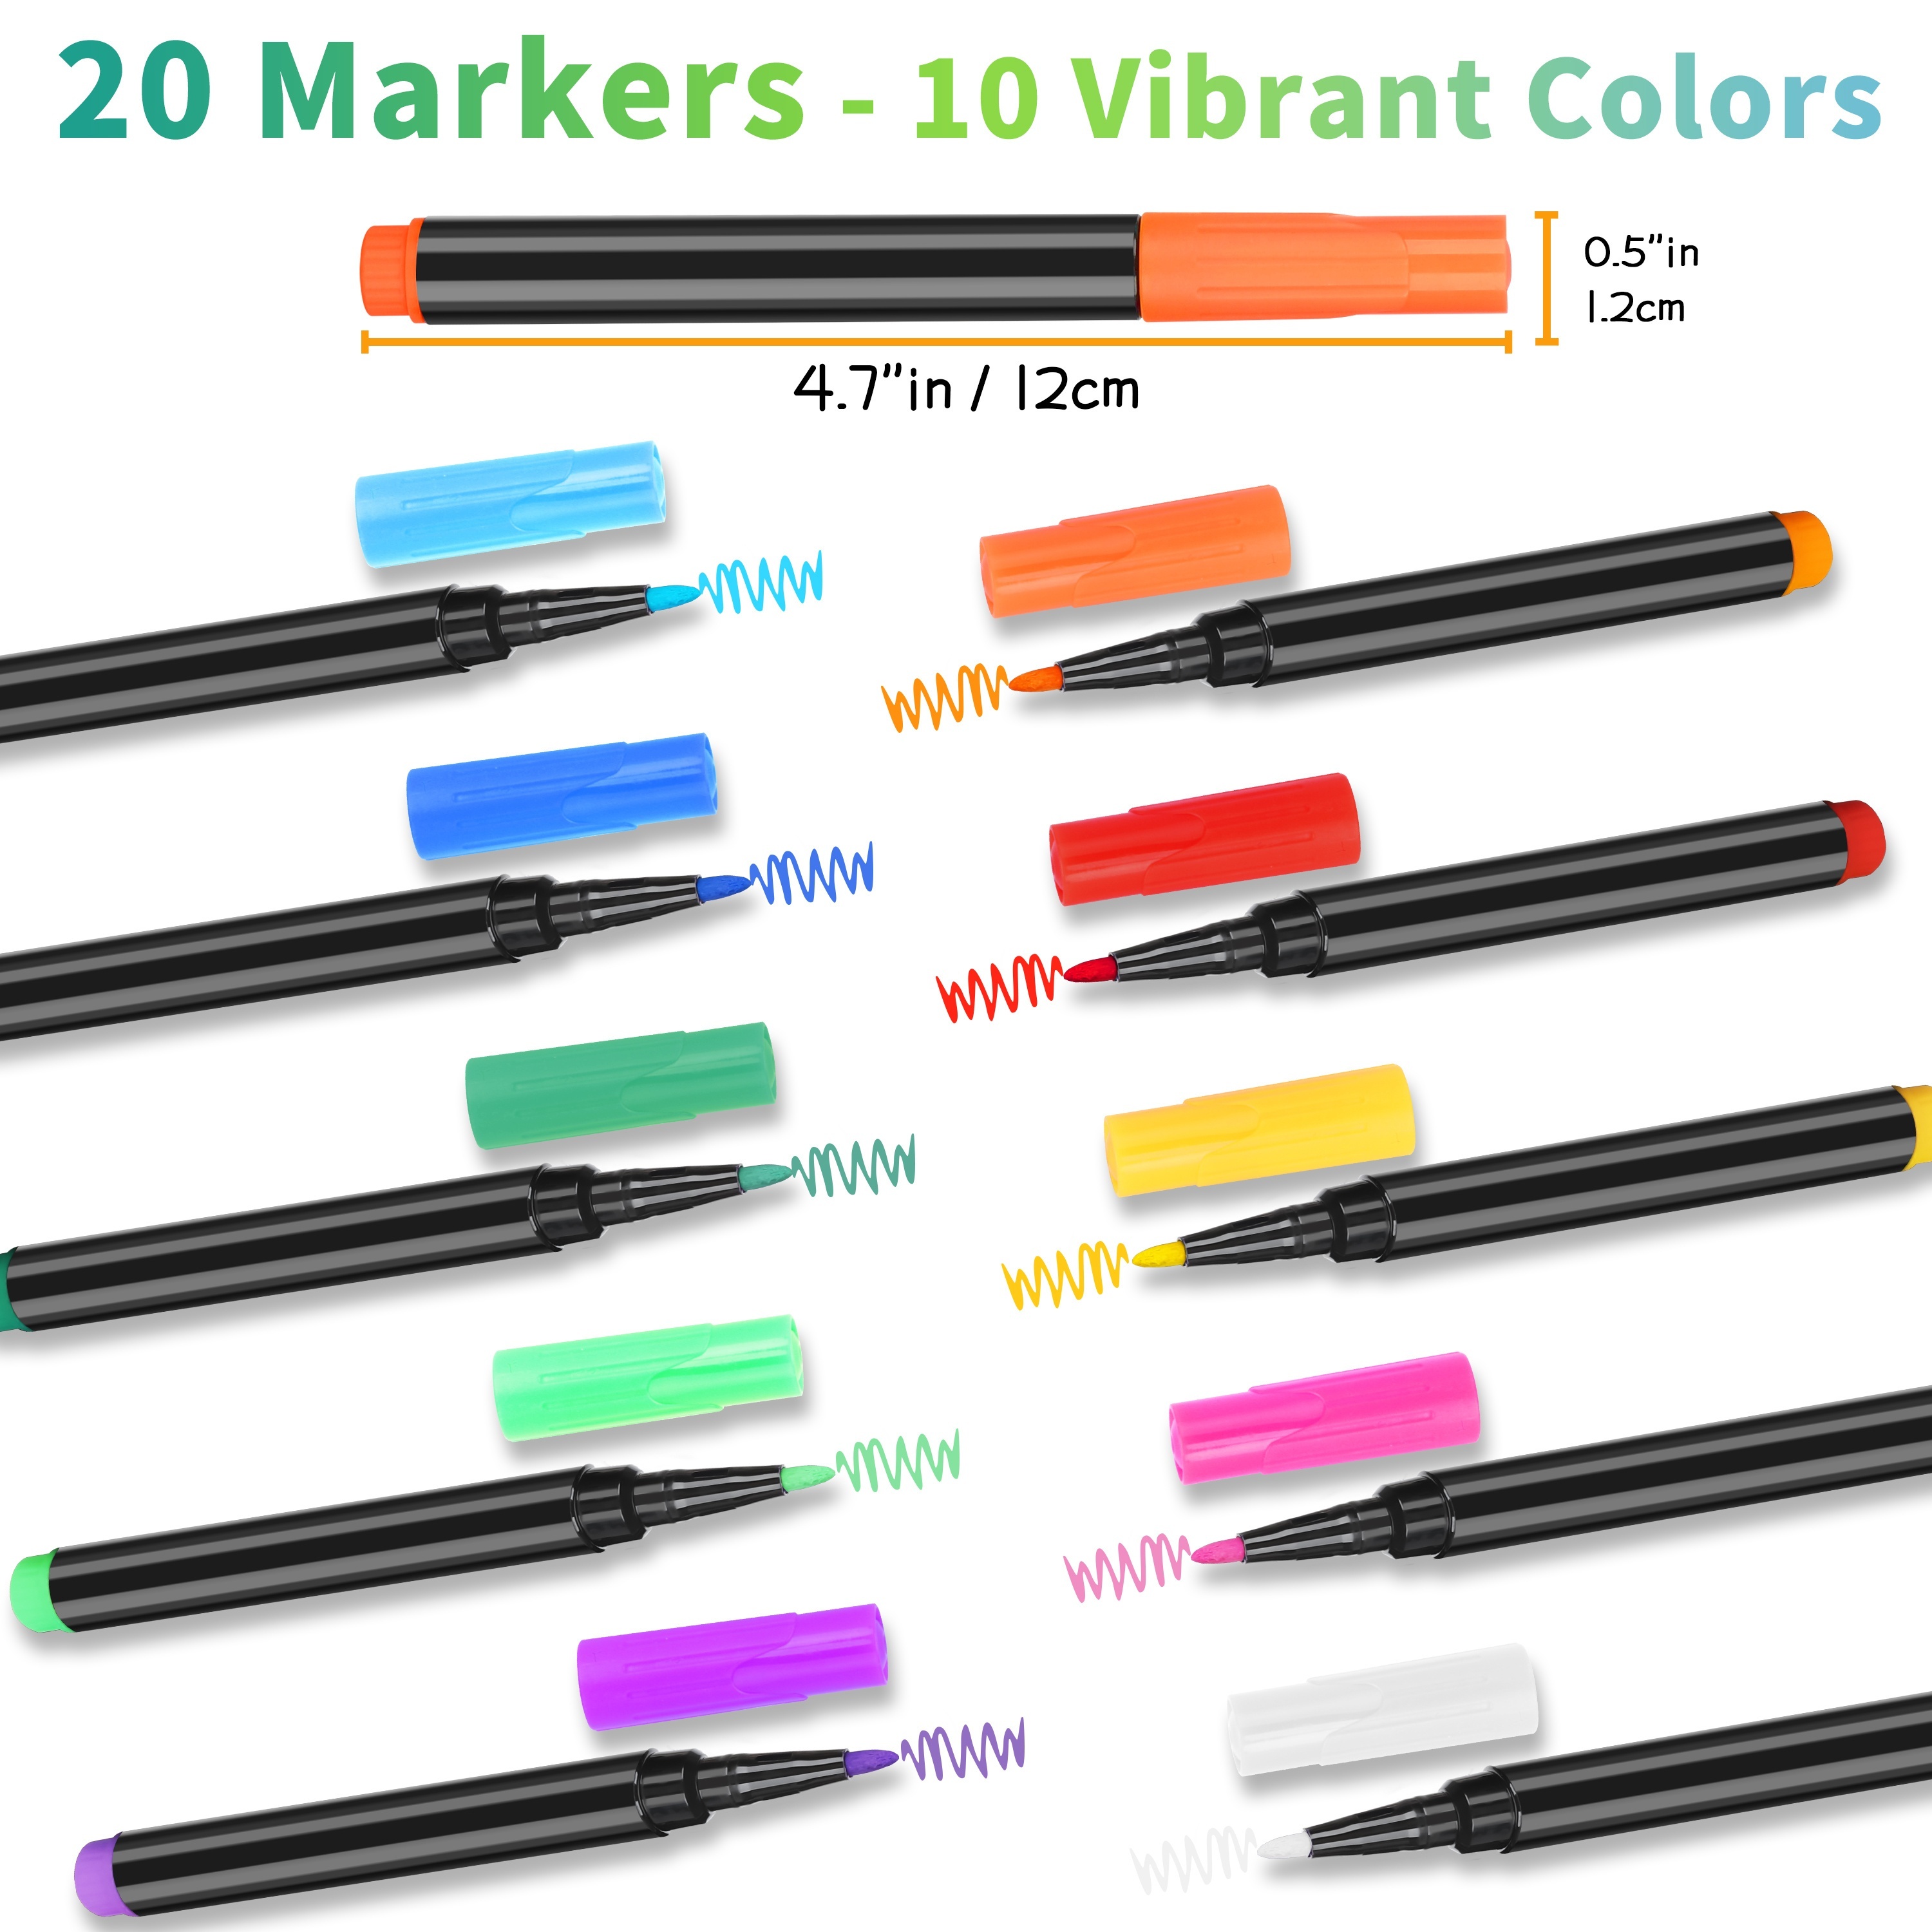 OORAII Magnetic Liquid Chalk Markers Wet Erase Markers for Acrylic Calendar Planning Board Clear Glass Writing Board Whiteboard Window/Mirror, 8